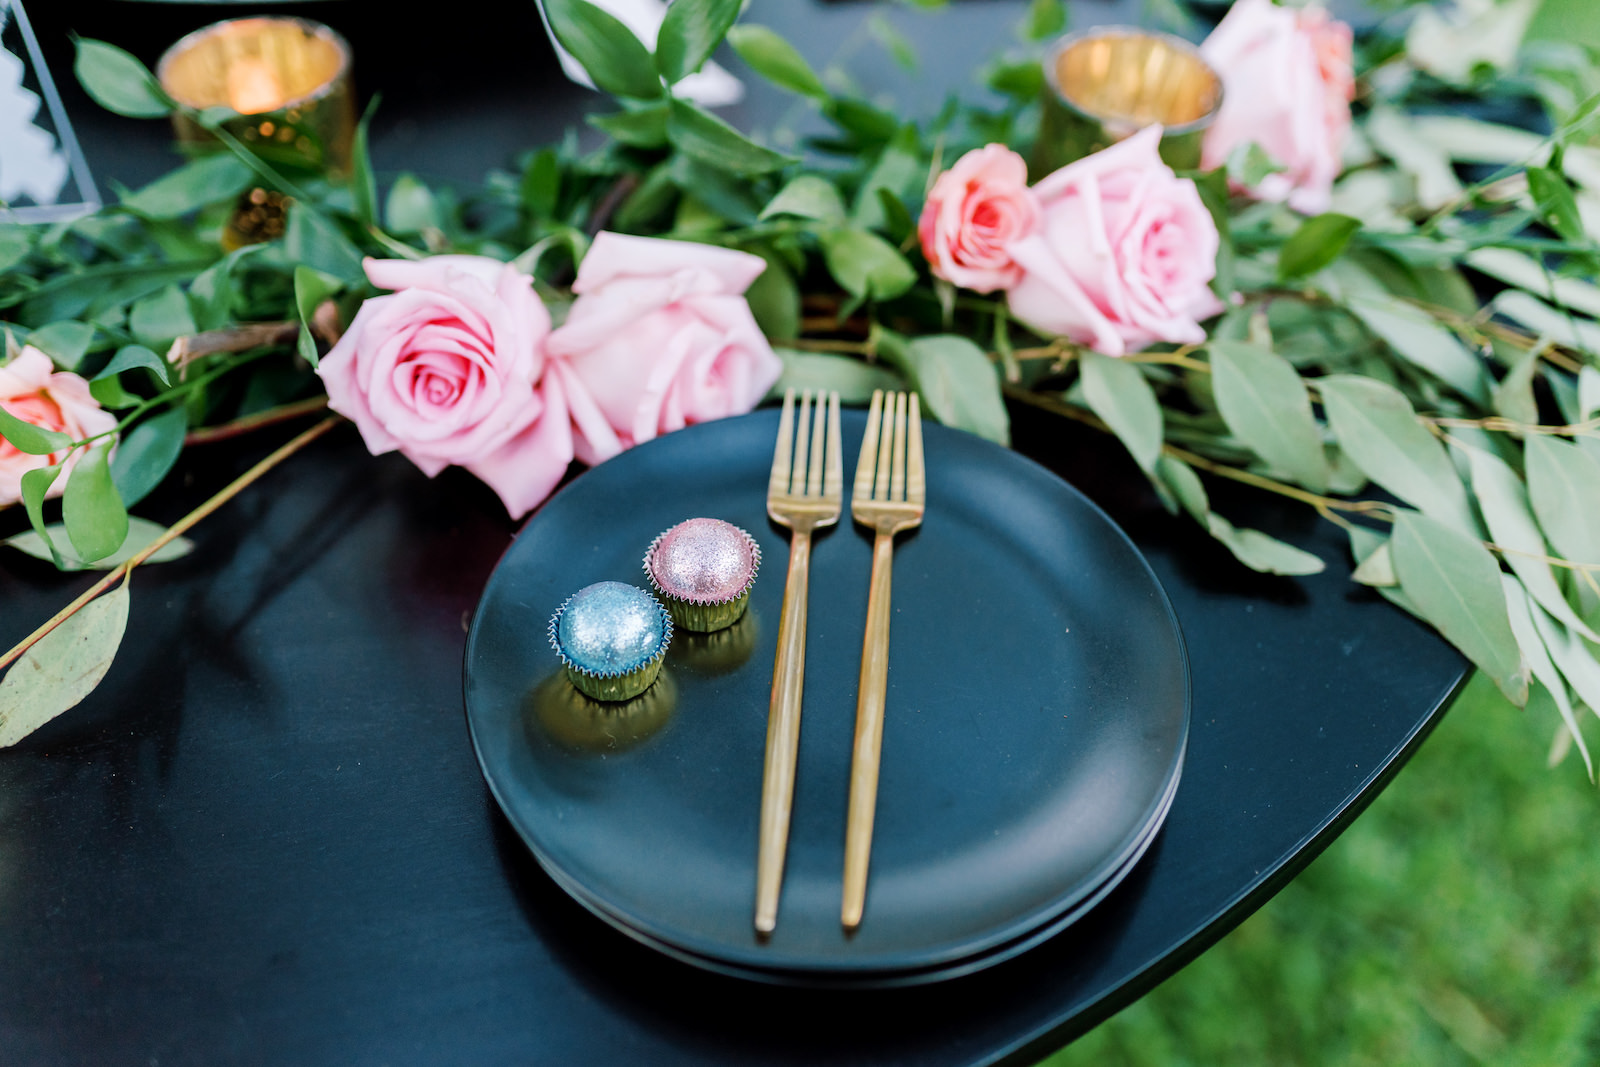 Romantic, Vintage Inspired Florida Wedding Table Setting, Dark Blue Plates with Gold Flatware and Pink and Blue custom Candies, Magnolia Leaves for Greenery with Roses | Tampa Bay Wedding Planners EventFull Weddings